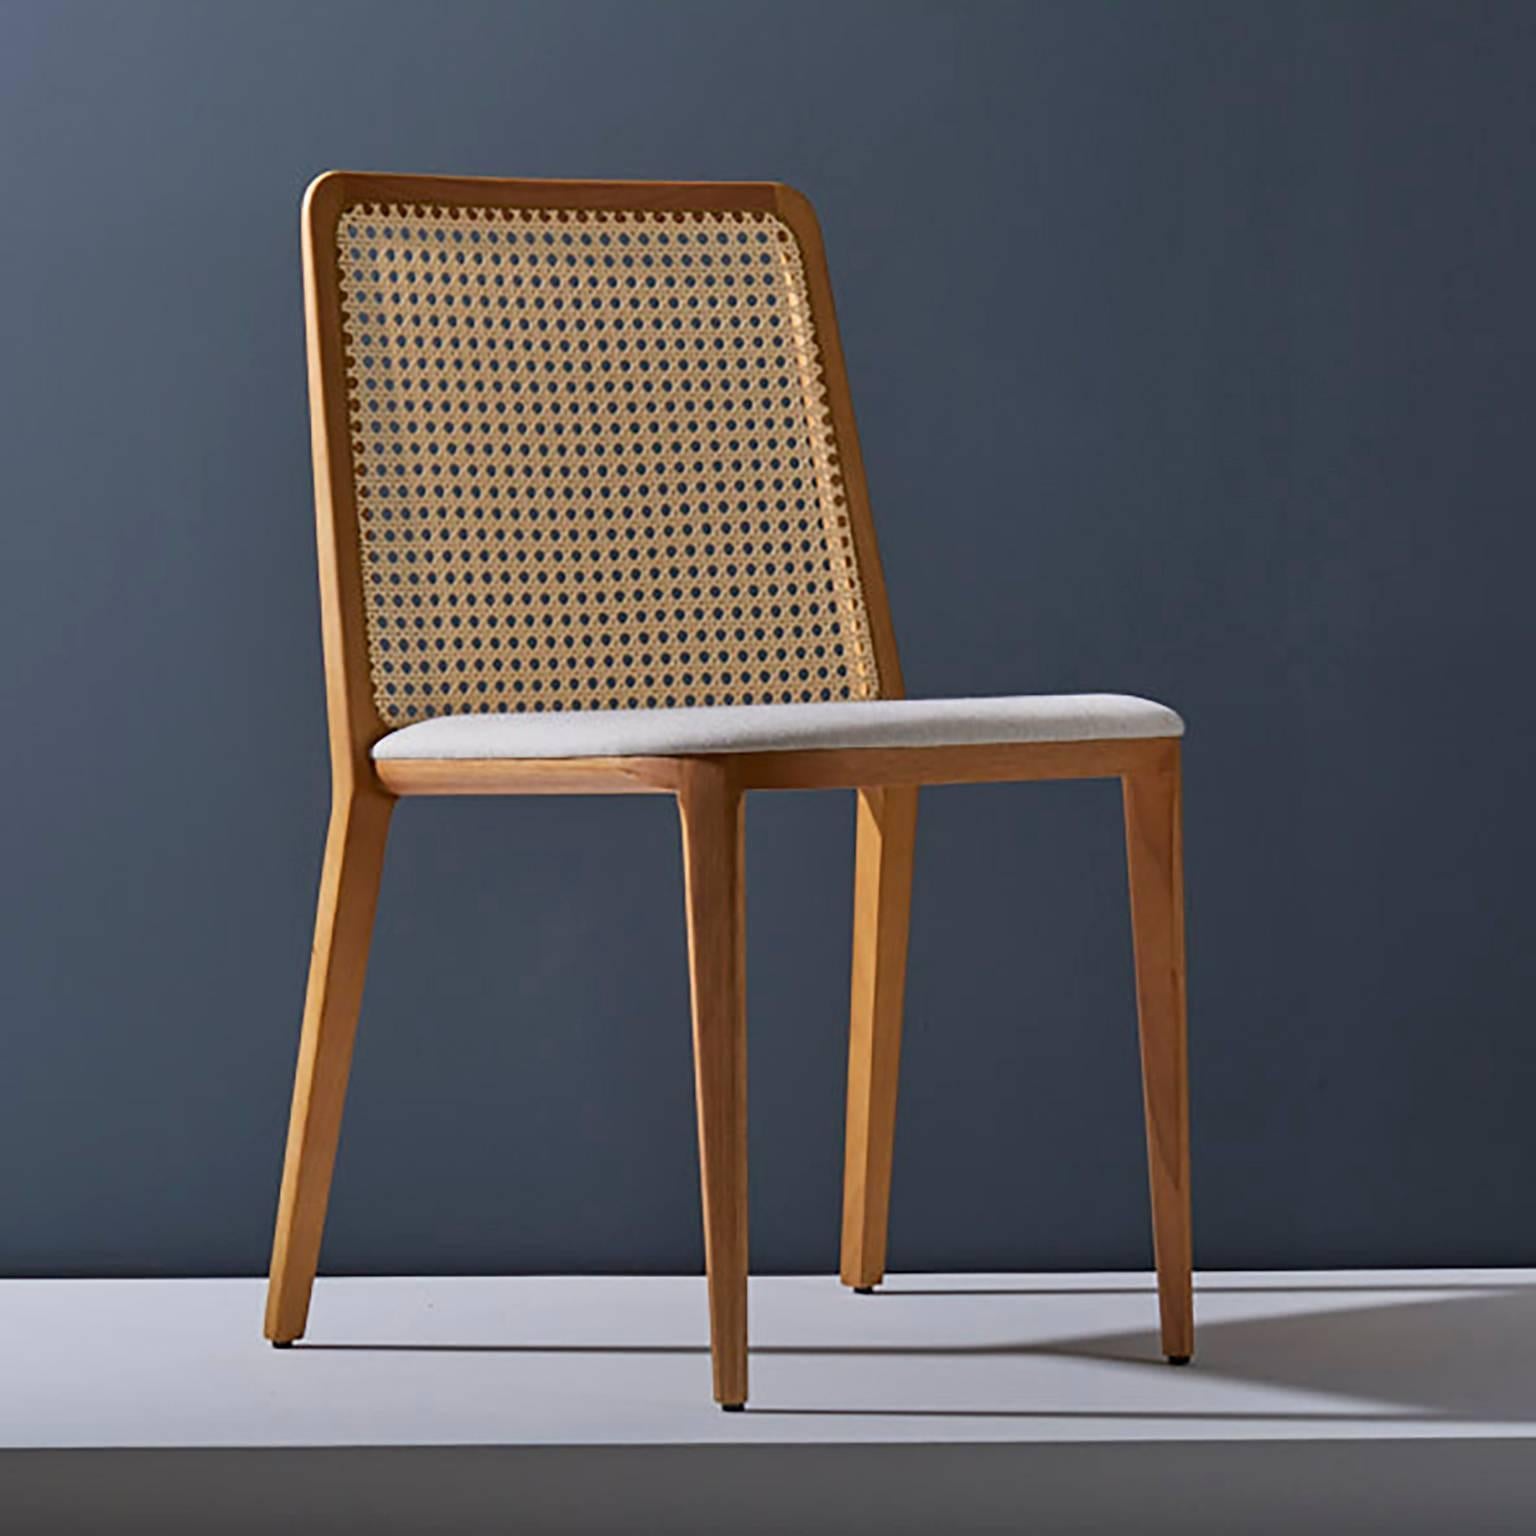 Contemporary Minimal Style, Solid Wood Chair, Leather or Textile Seating, Caning Backboard For Sale